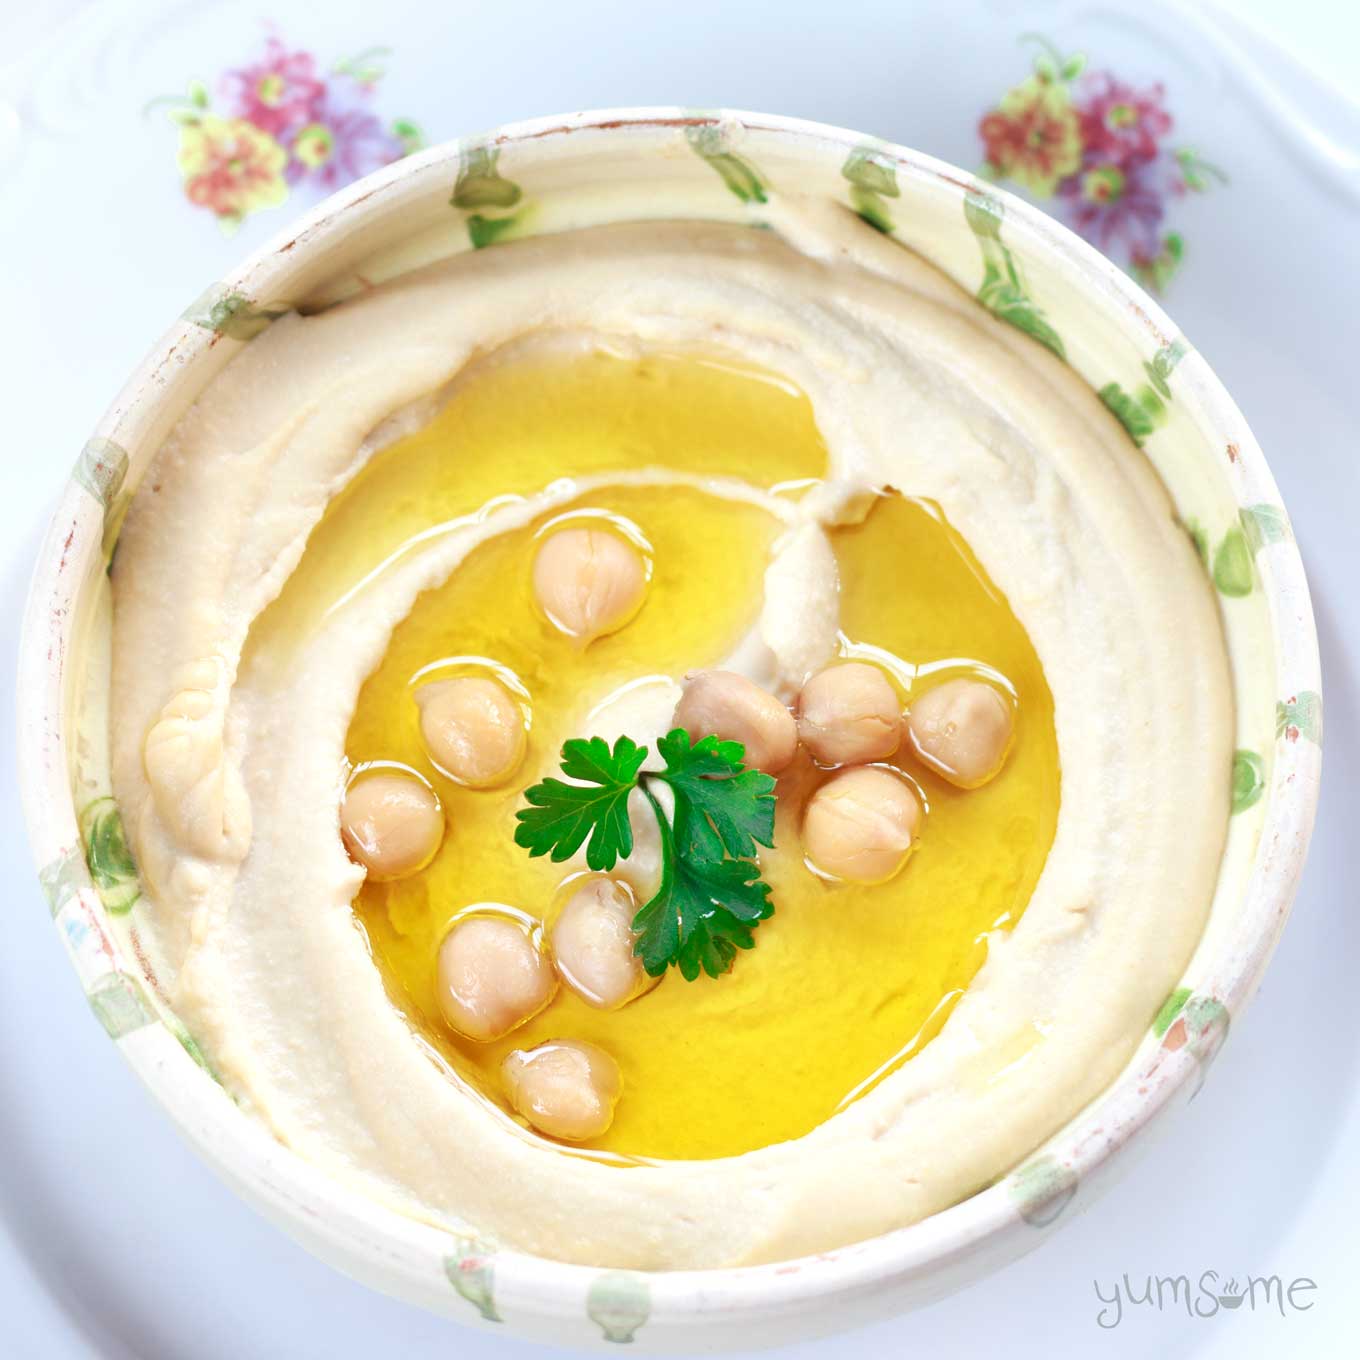 Overhead view of a bowl of hummus with olive oil, chickpeas, and parsley.